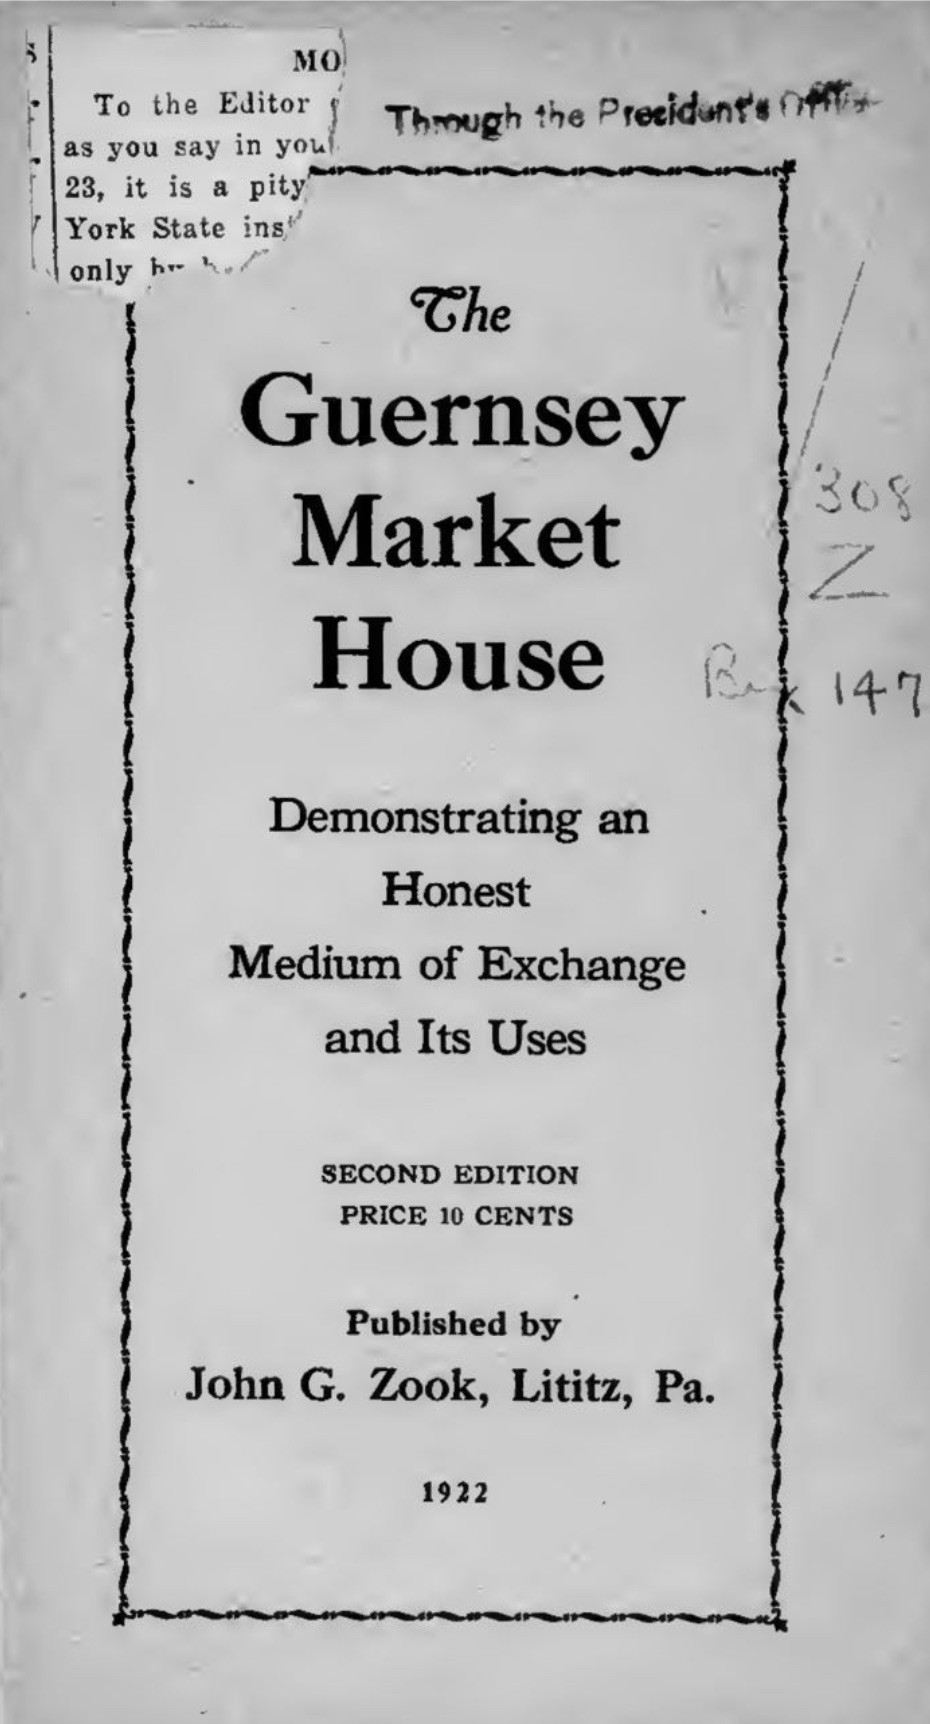 The Guernsey Market House - Demonstrating an Honest Medium of Exchange and Its Uses (1922) by John G. Zook